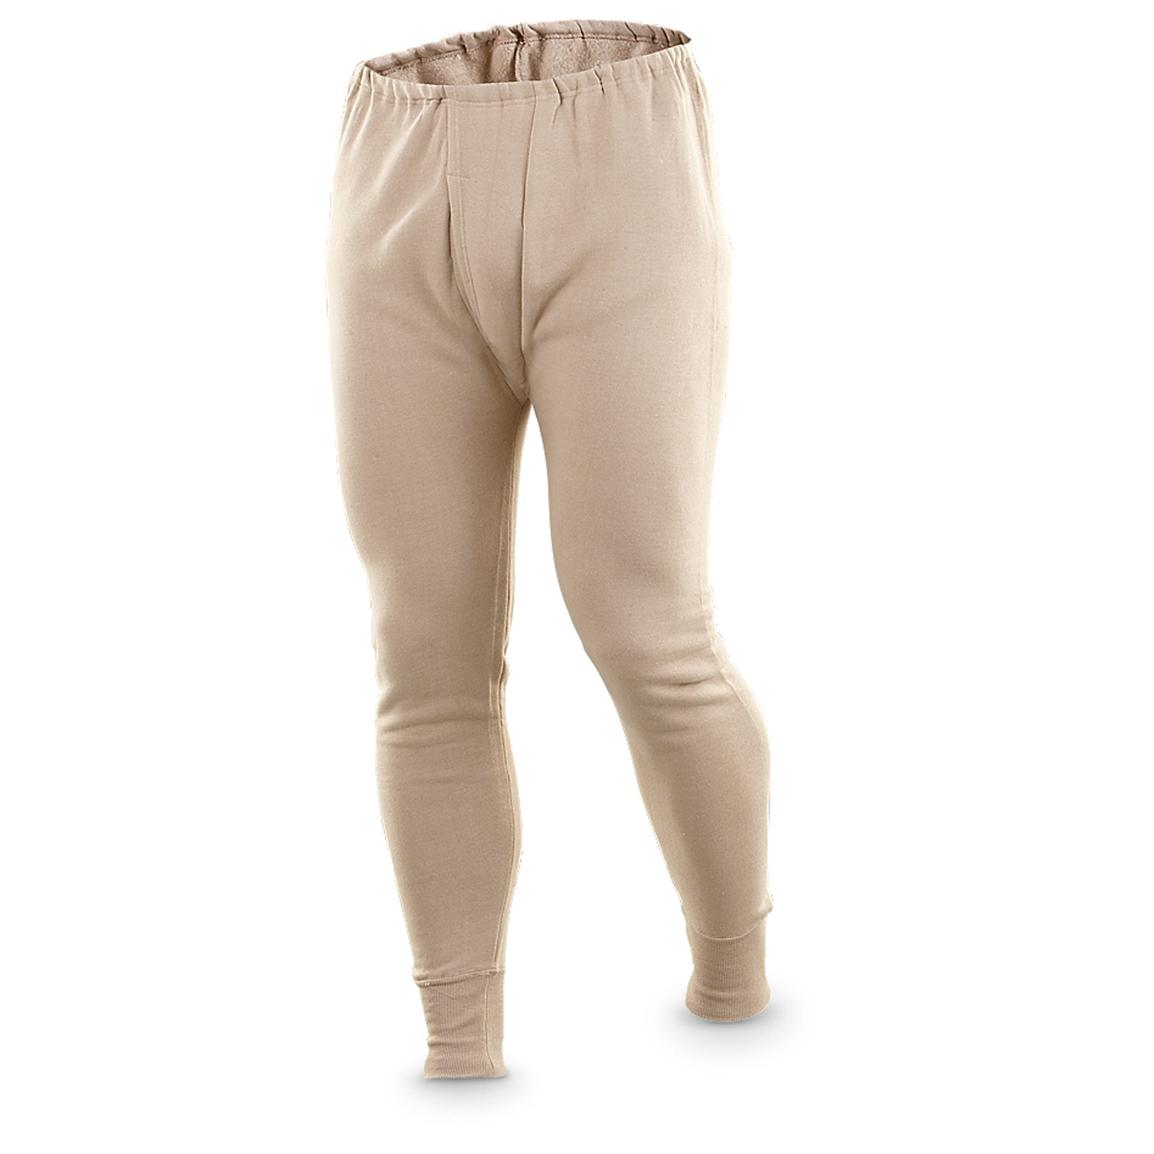 8 Used Czech Military Surplus Long Johns, Beige - 219117, Military ...